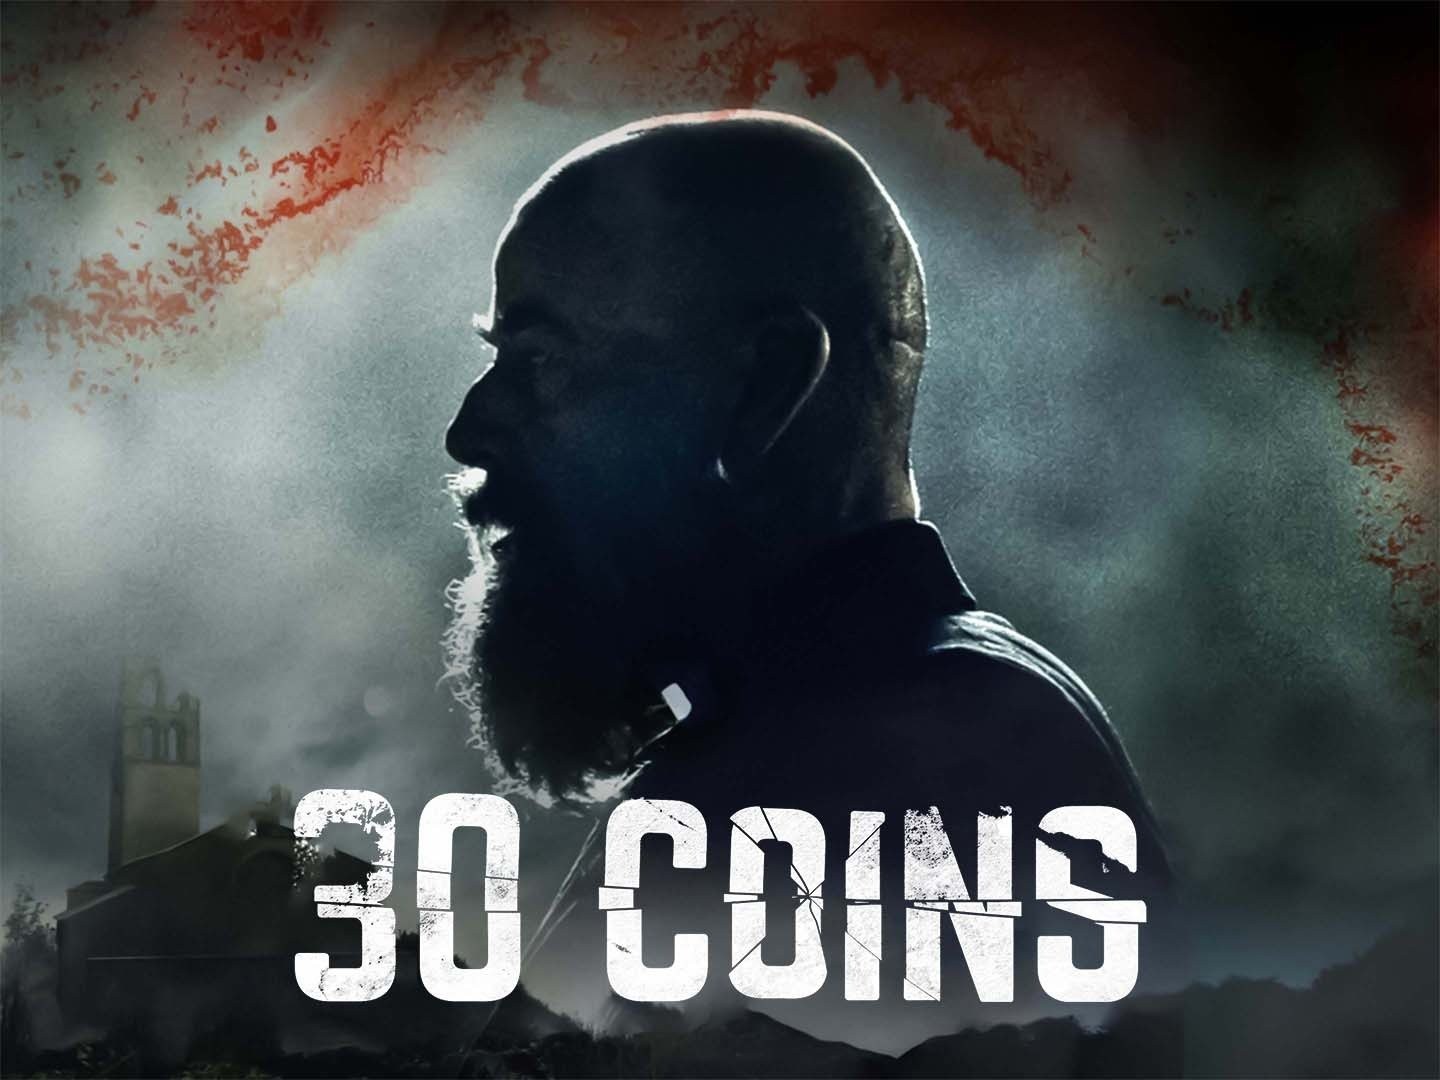 Merche played by Macarena Gomez on 30 Coins (30 Monedas) - Official Website  for the HBO Series